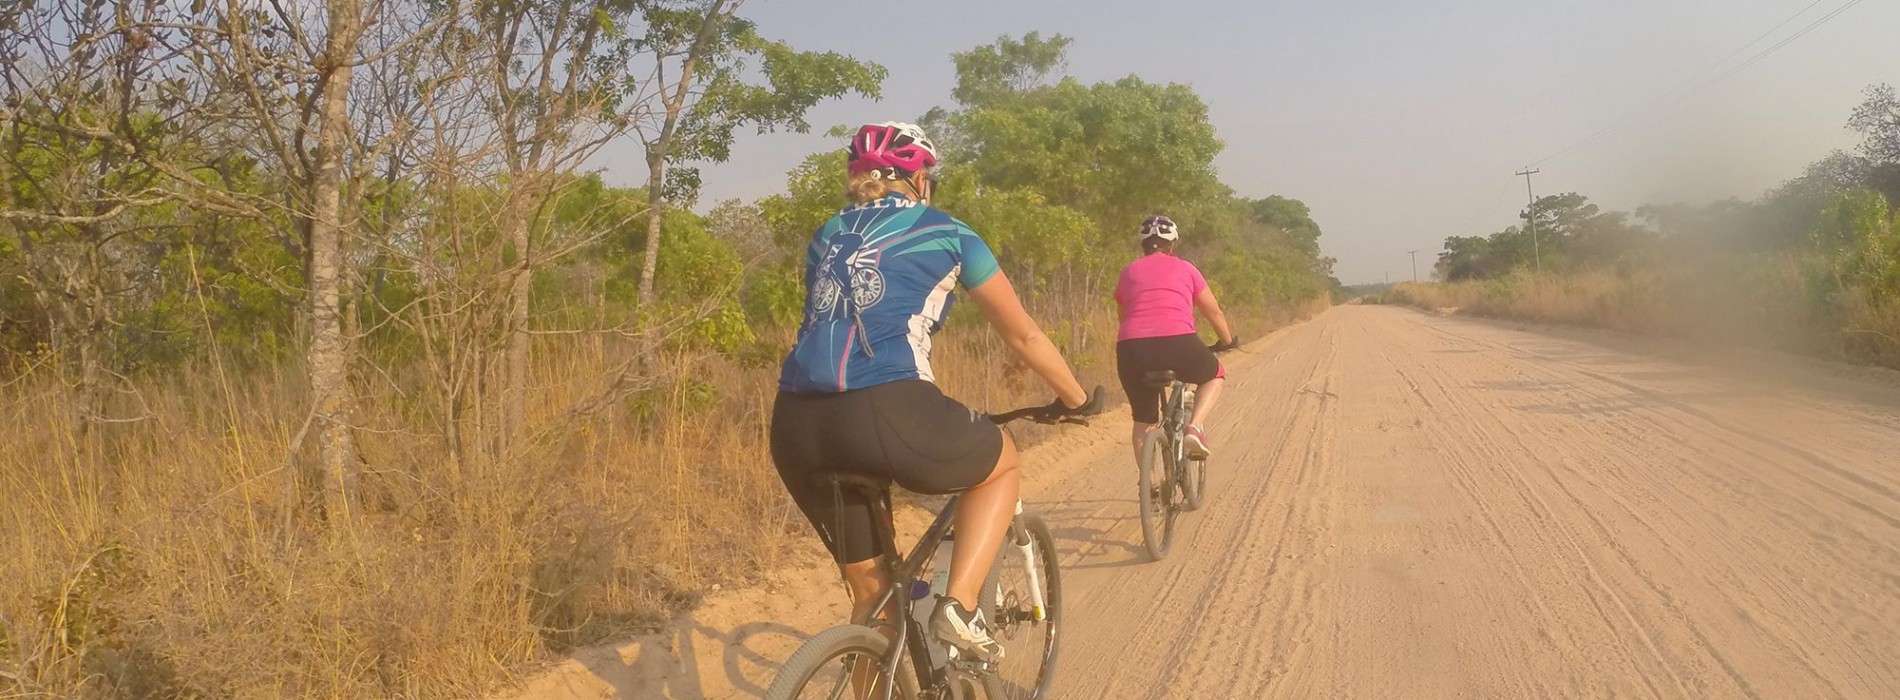 Riding on dirt roads in Zambia